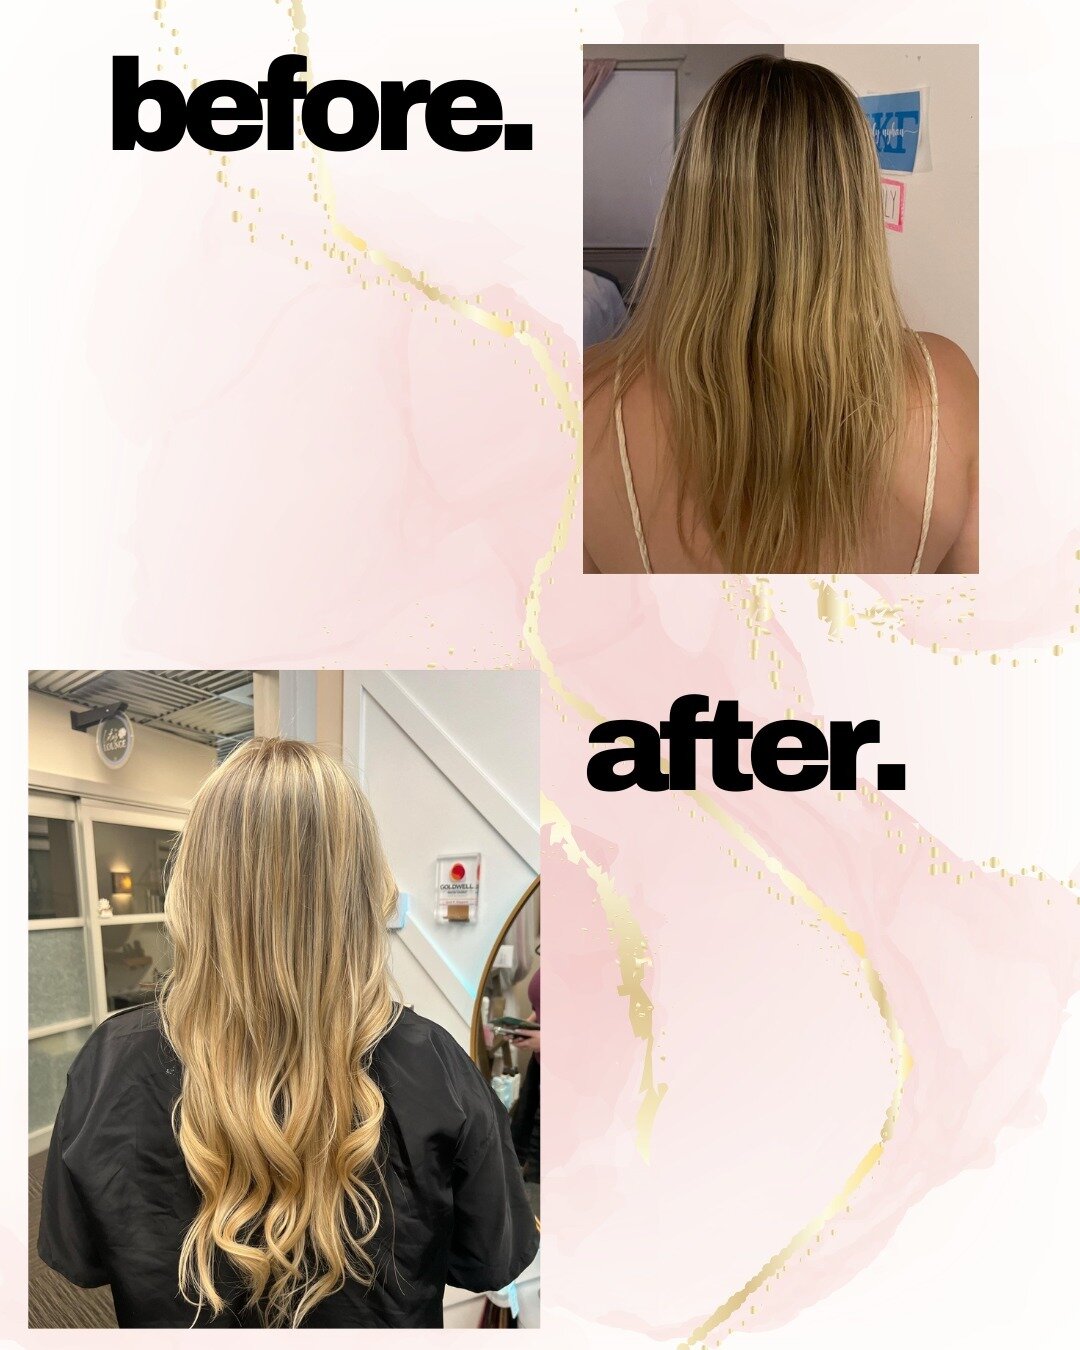 Are you curious if hair extensions are the right fit for your hair? Read below for a few ways extensions can benefit you! 👇

1️⃣ Looking to add volume and texture into your hair 
2️⃣ Fix split ends or damaged hair 
3️⃣ Looking to update your hairsty